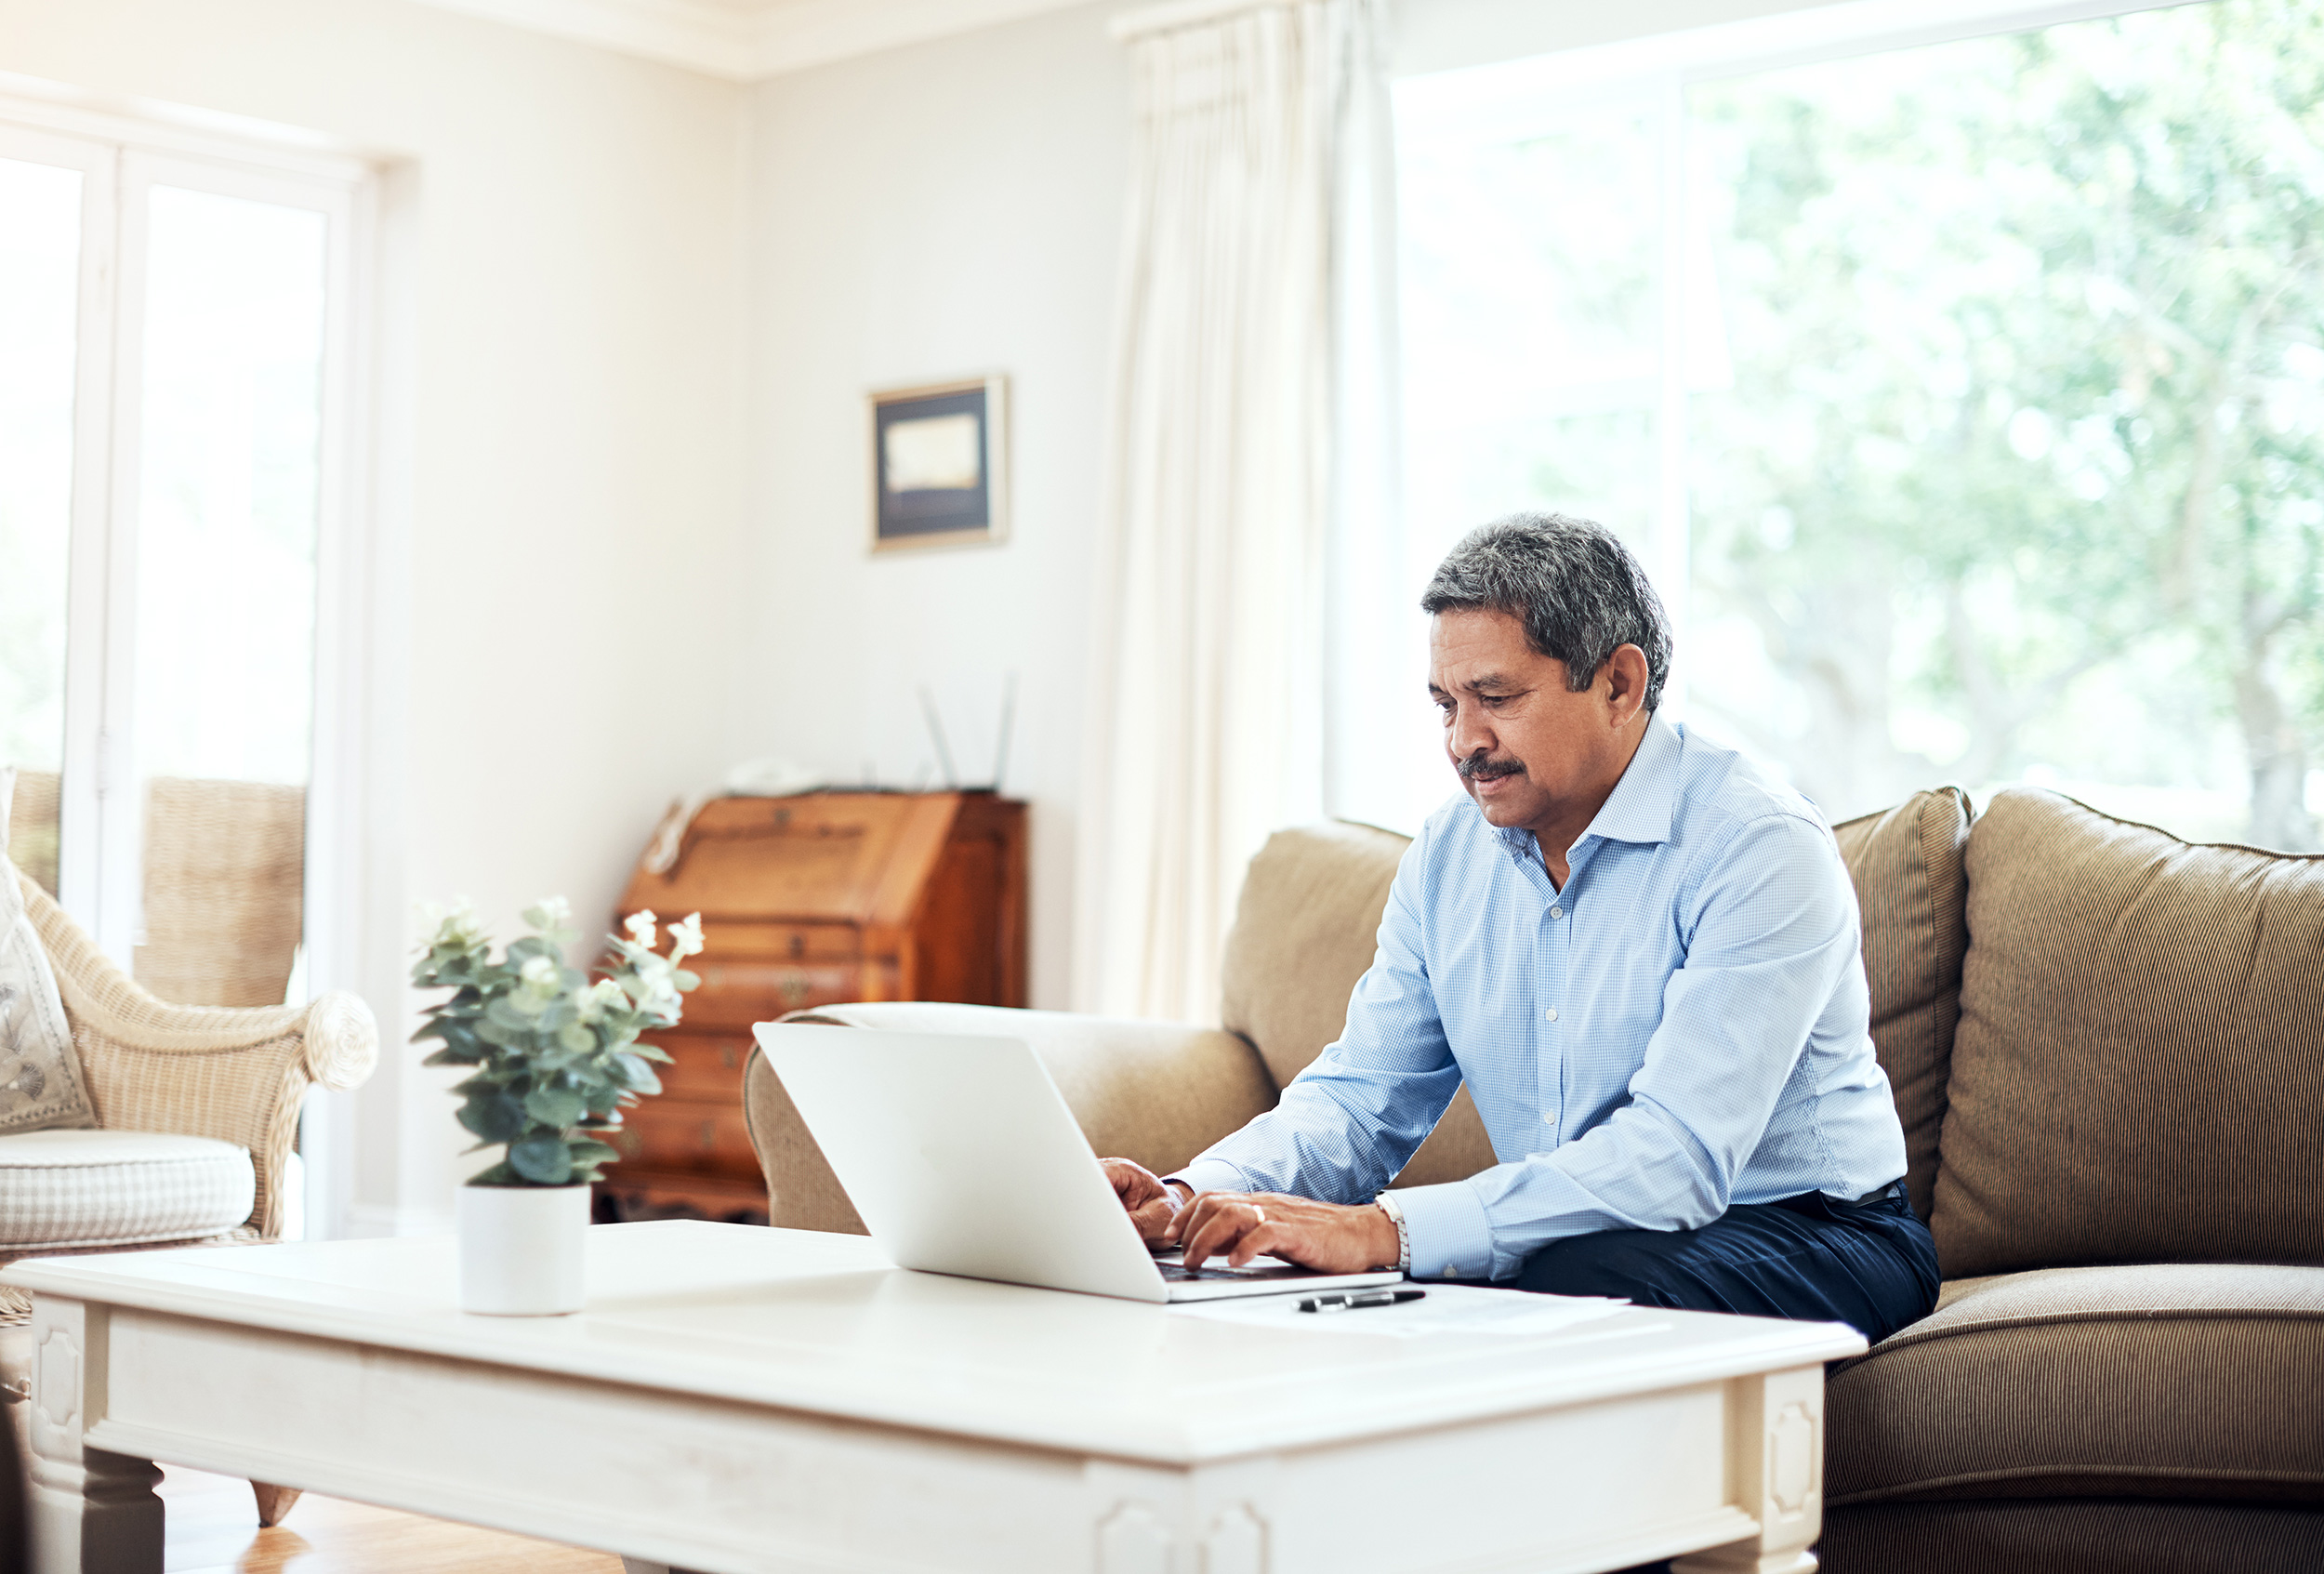 From his couch, a man types on a laptop on his coffee table. A disability lawyer can help you appeal a denial of Social Security Disability benefits.